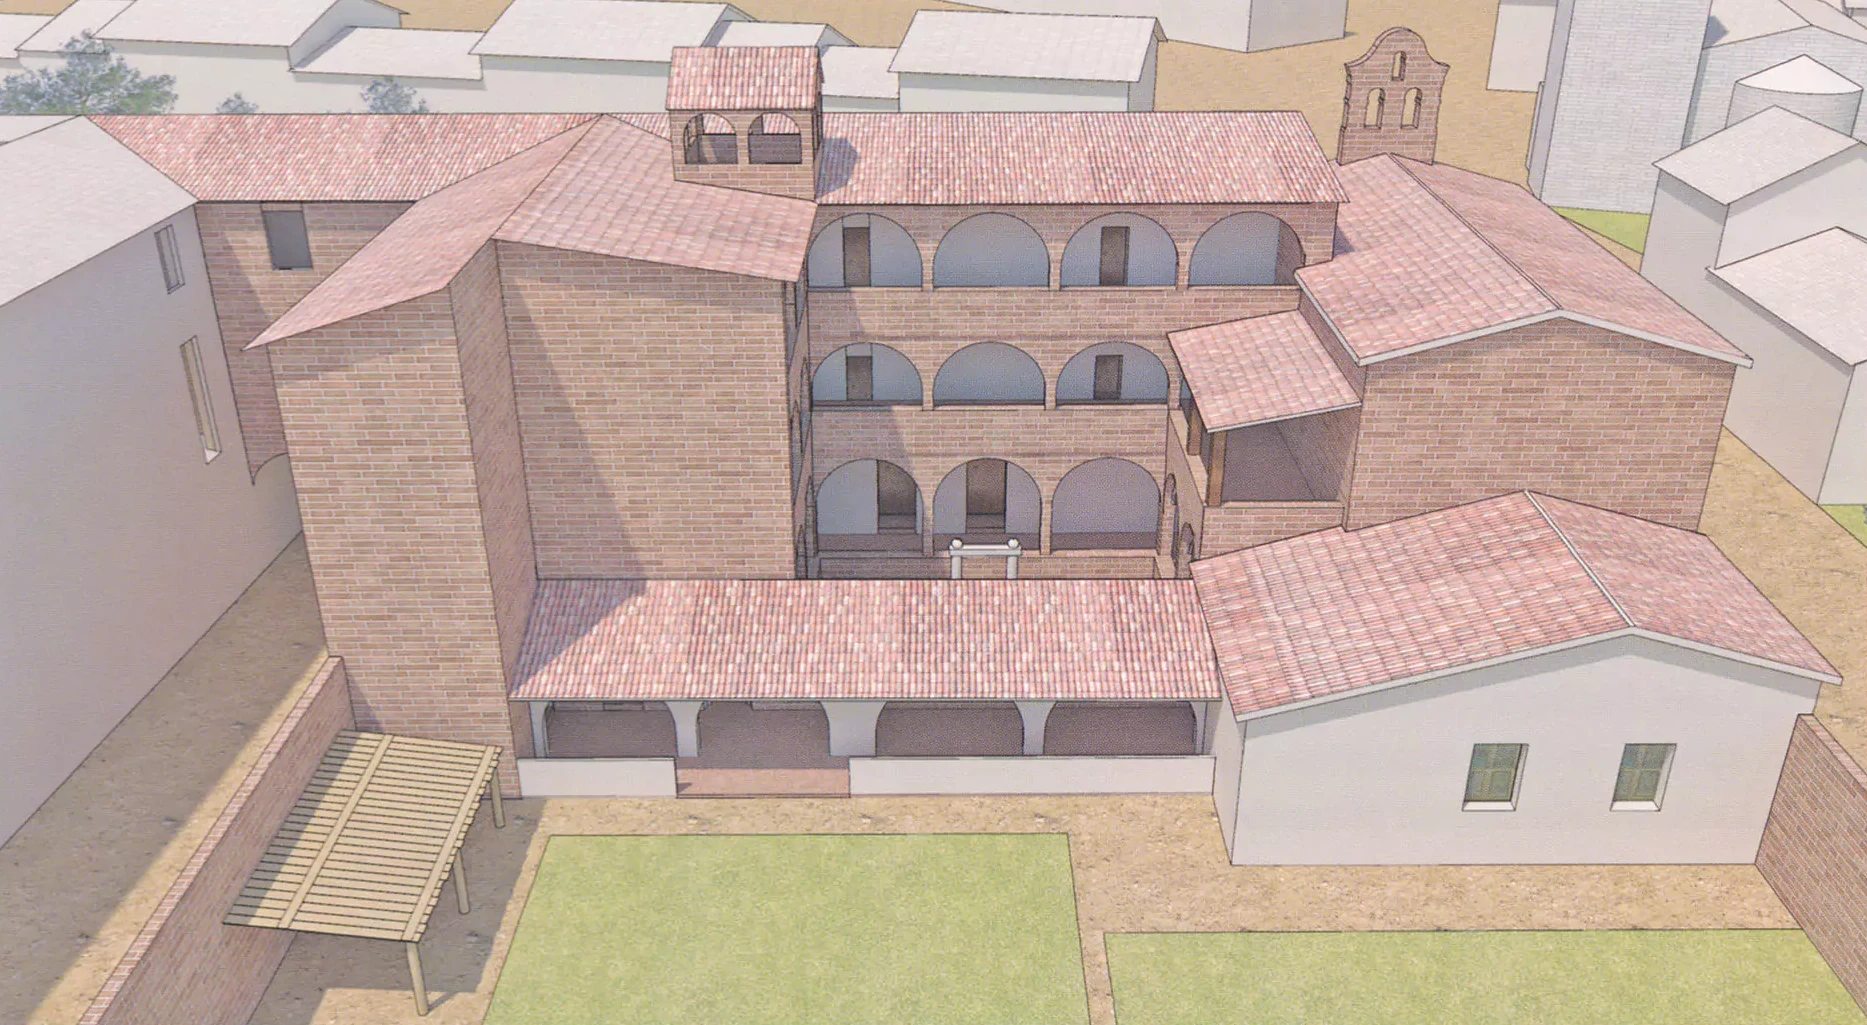 Study and three dimensional reconstruction of the building's historical phases: around the beginning of 1700